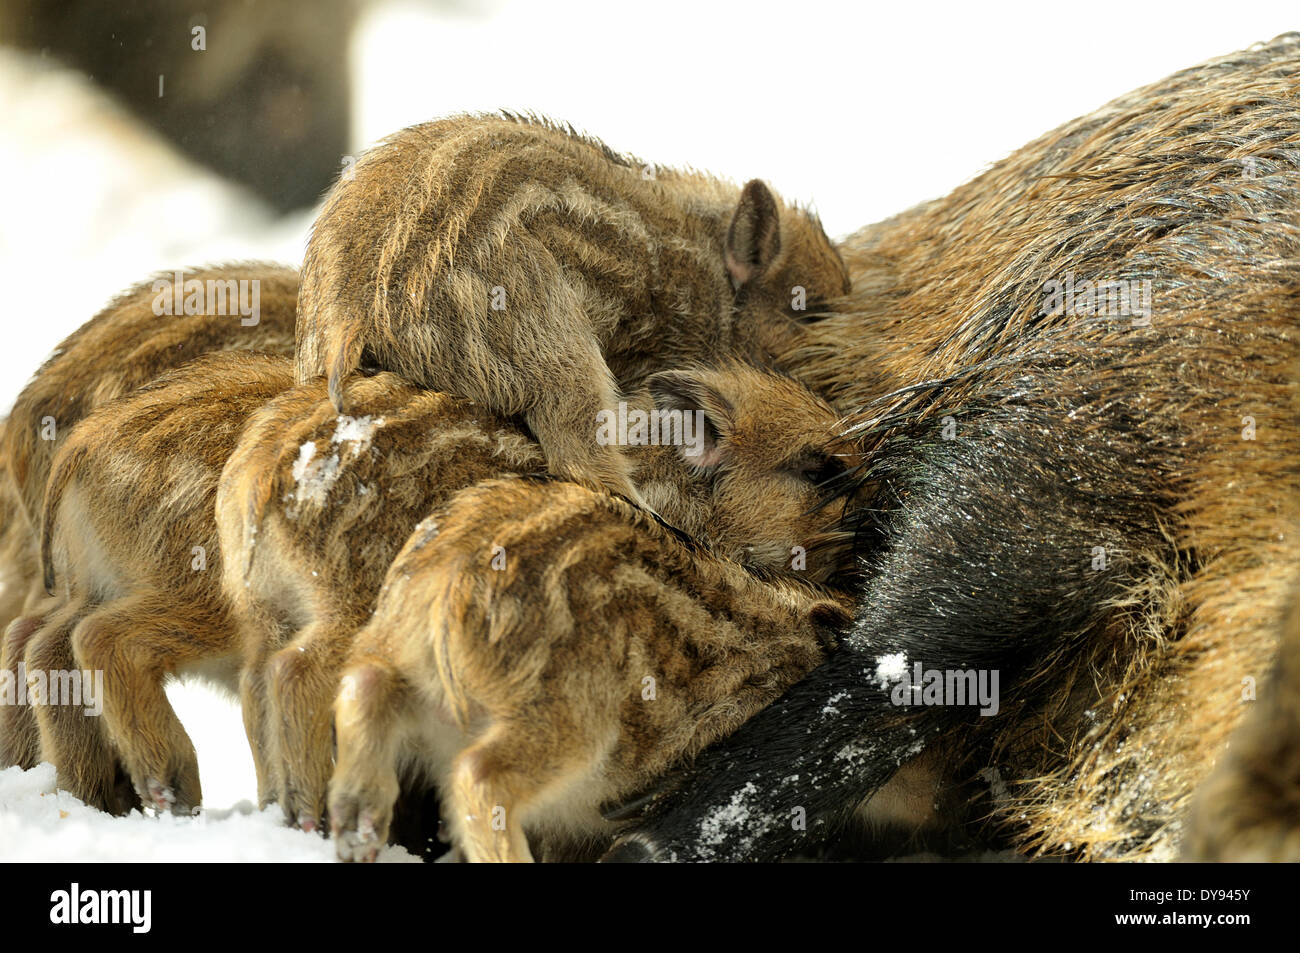 Les Jeunes sangliers sauvages, sow, femme, mars, marcassin, hiver, sangliers, neige, animal, animaux, France, Europe, Banque D'Images